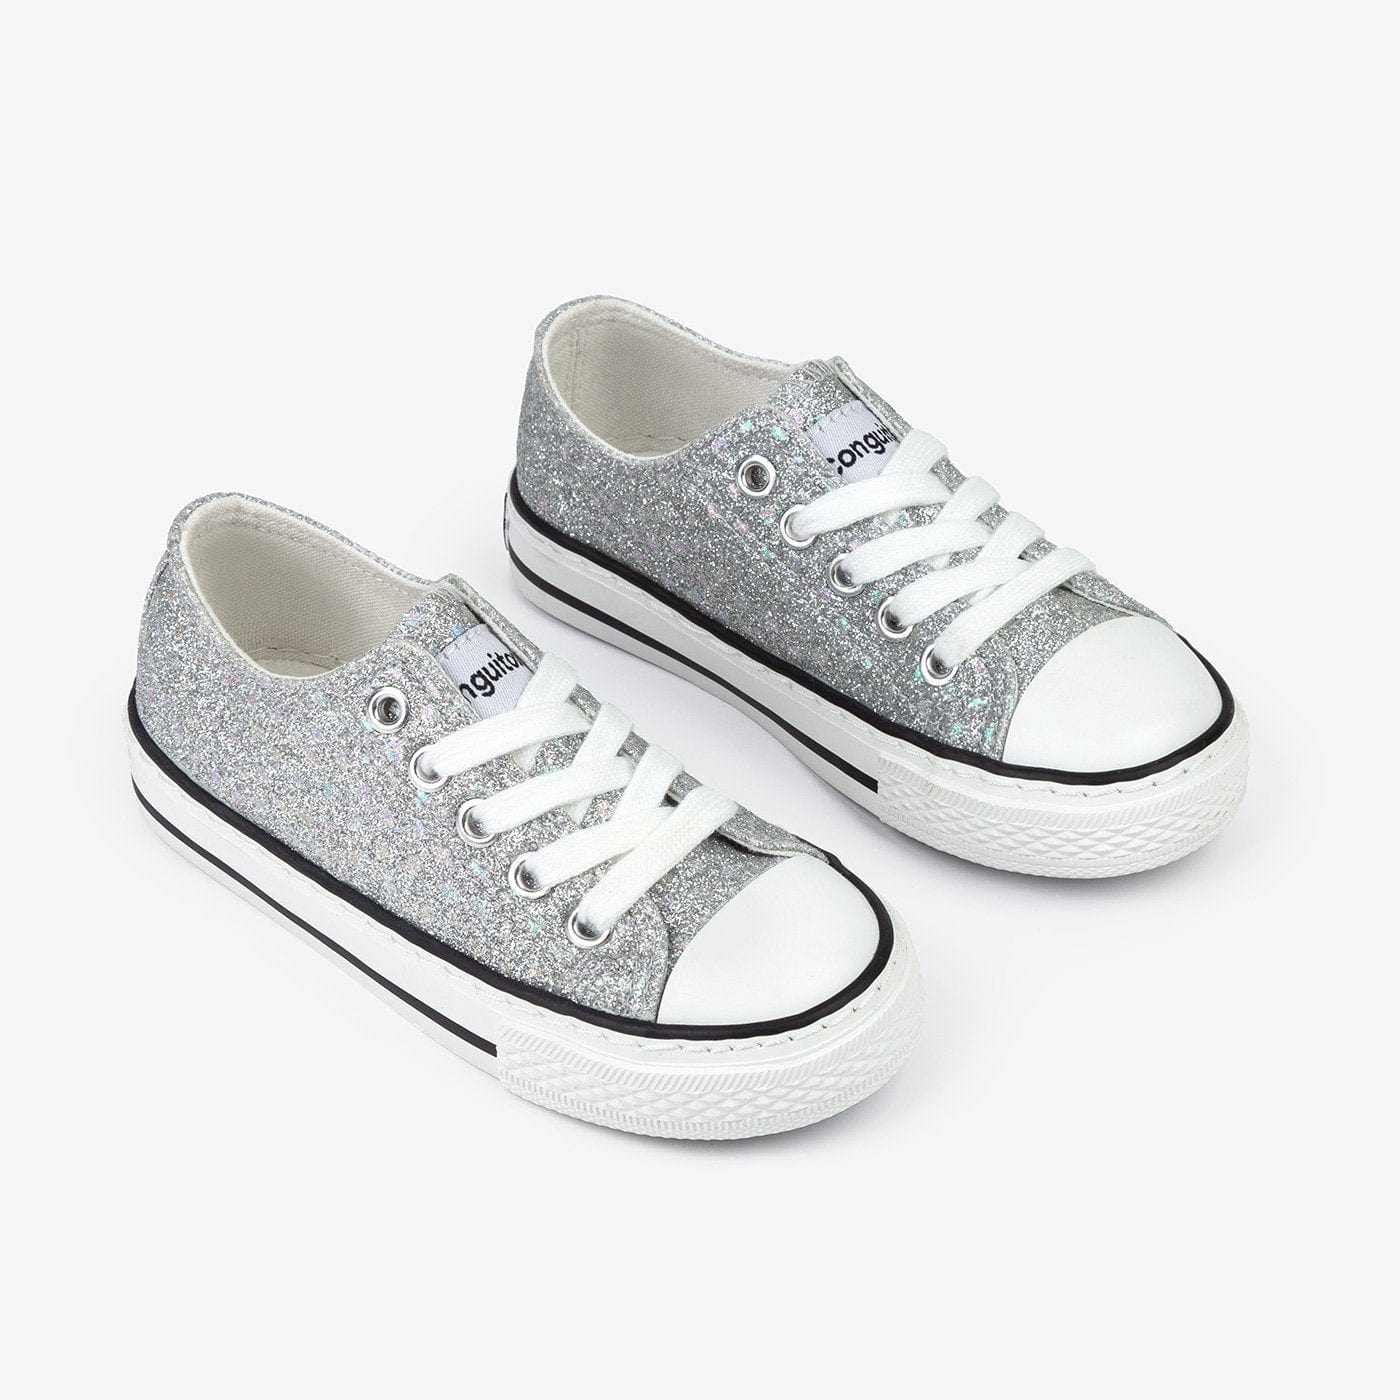 CONGUITOS Shoes Girl's Silver Glitter Canvas Sneakers